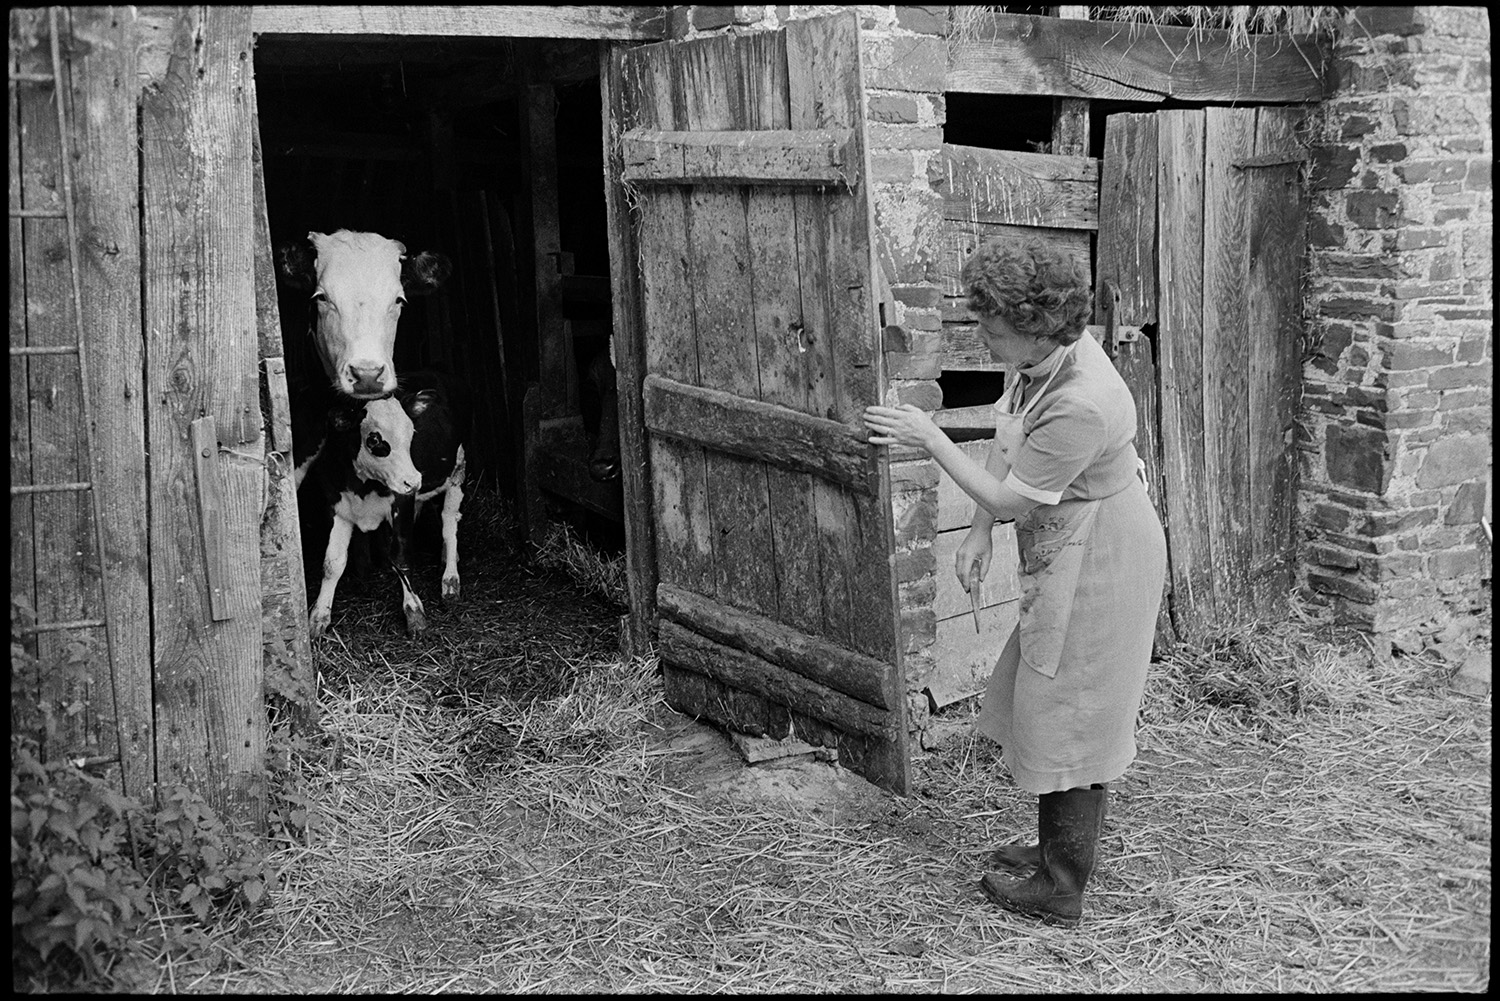 Woman, farmer's wife feeding calves. 
[Pam Down opening the wooden door to a barn with a cow and calf inside, at Spittle Farm, Chulmleigh.]